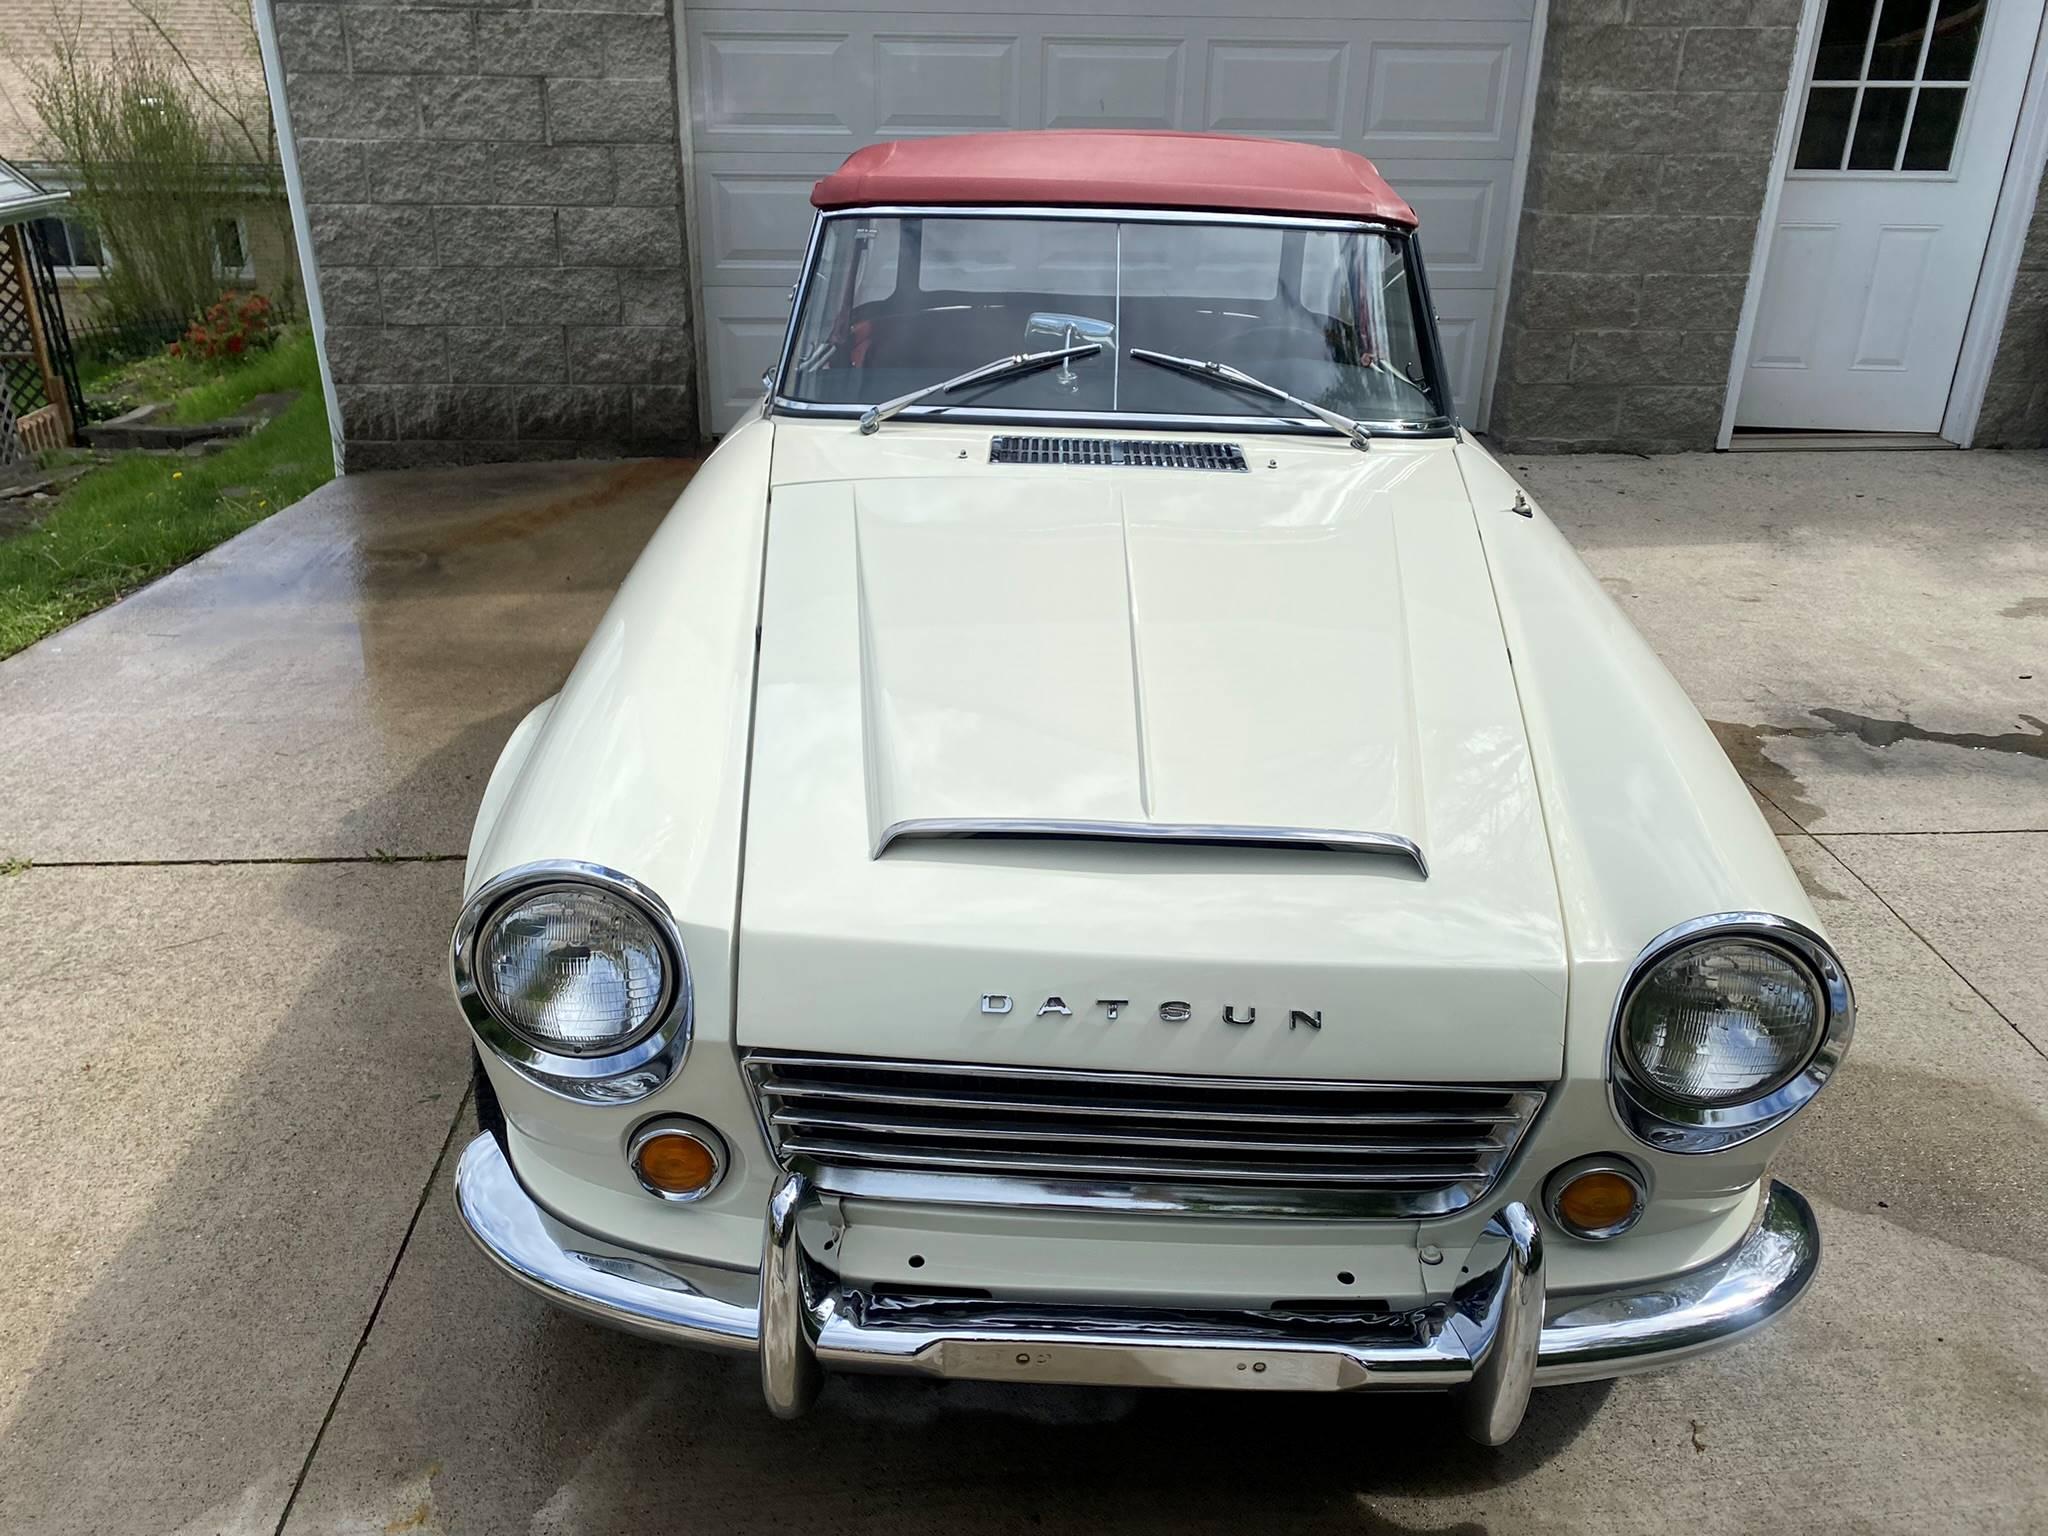 1967 Datsun Fairlady Convertible. Restored several years ago with a recent